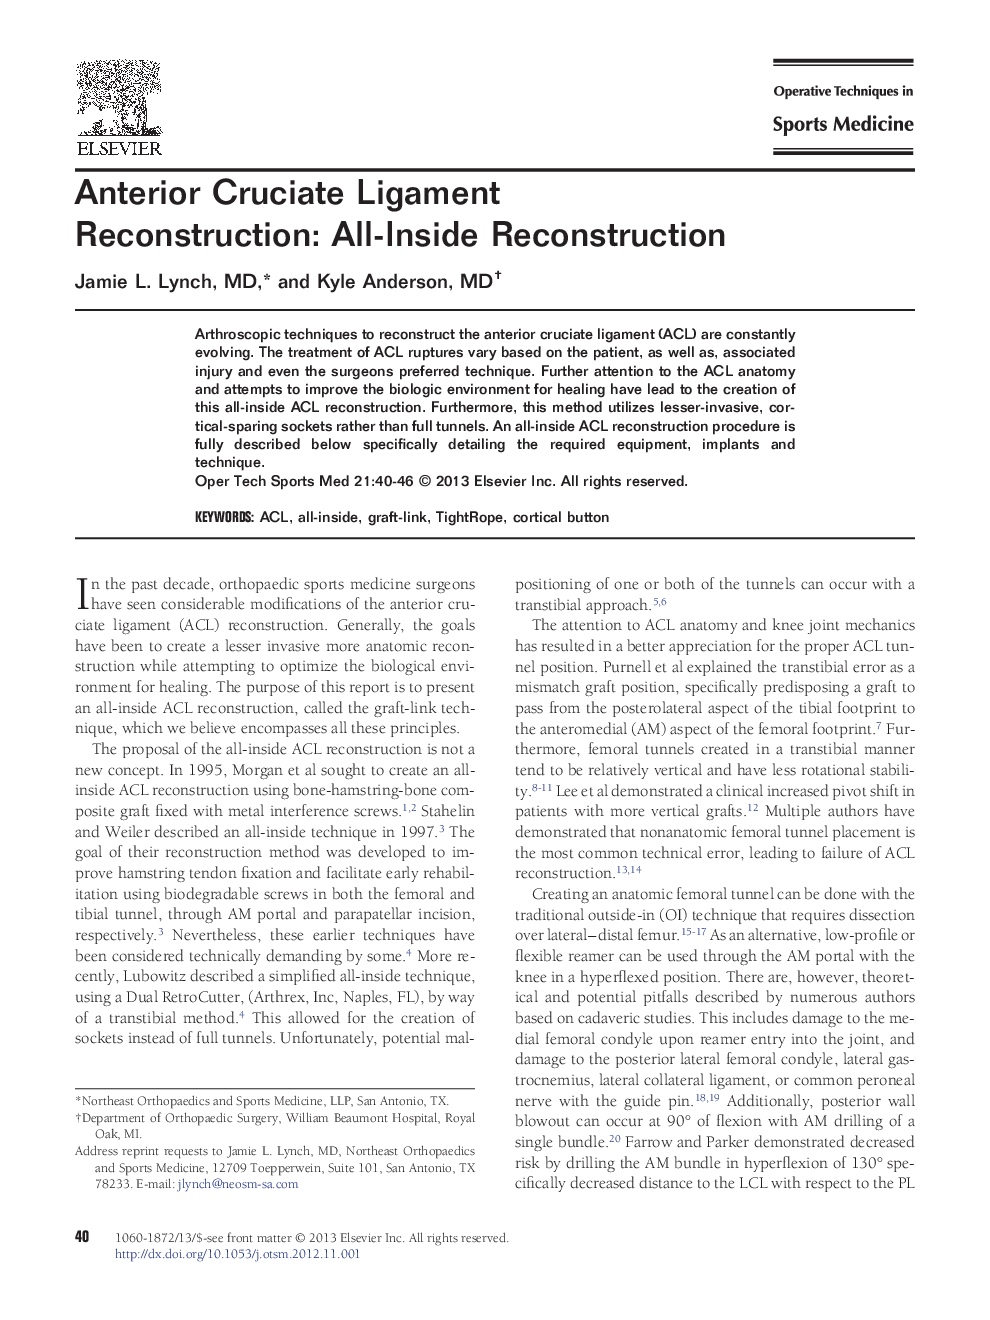 Anterior Cruciate Ligament Reconstruction: All-Inside Reconstruction